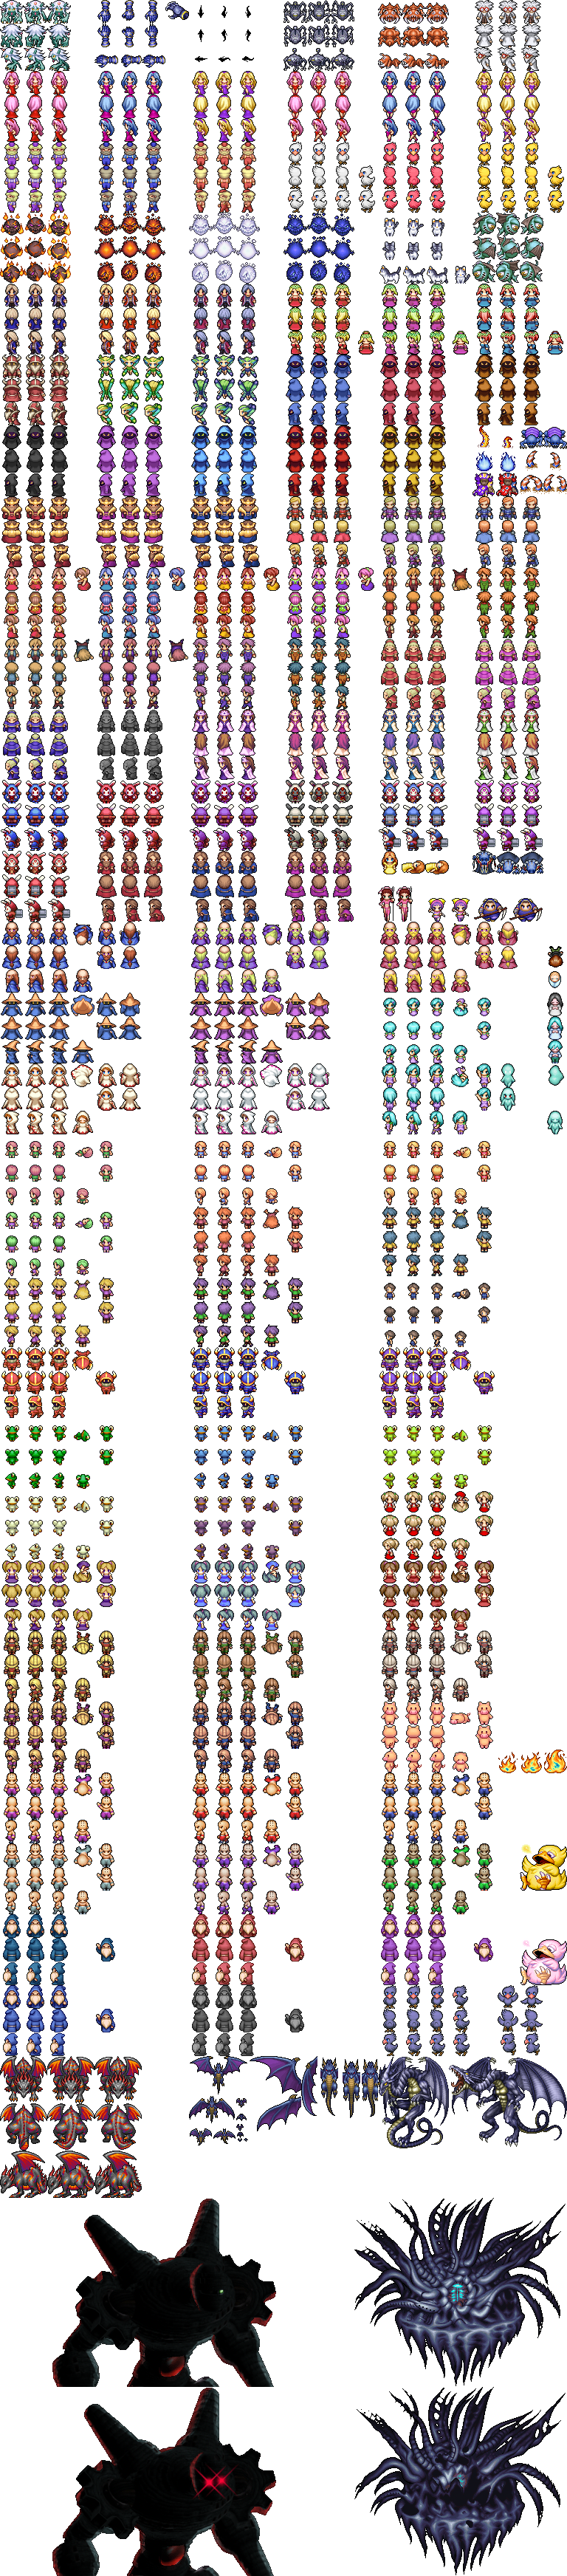 Final Fantasy 4: The Complete Collection - NPCs